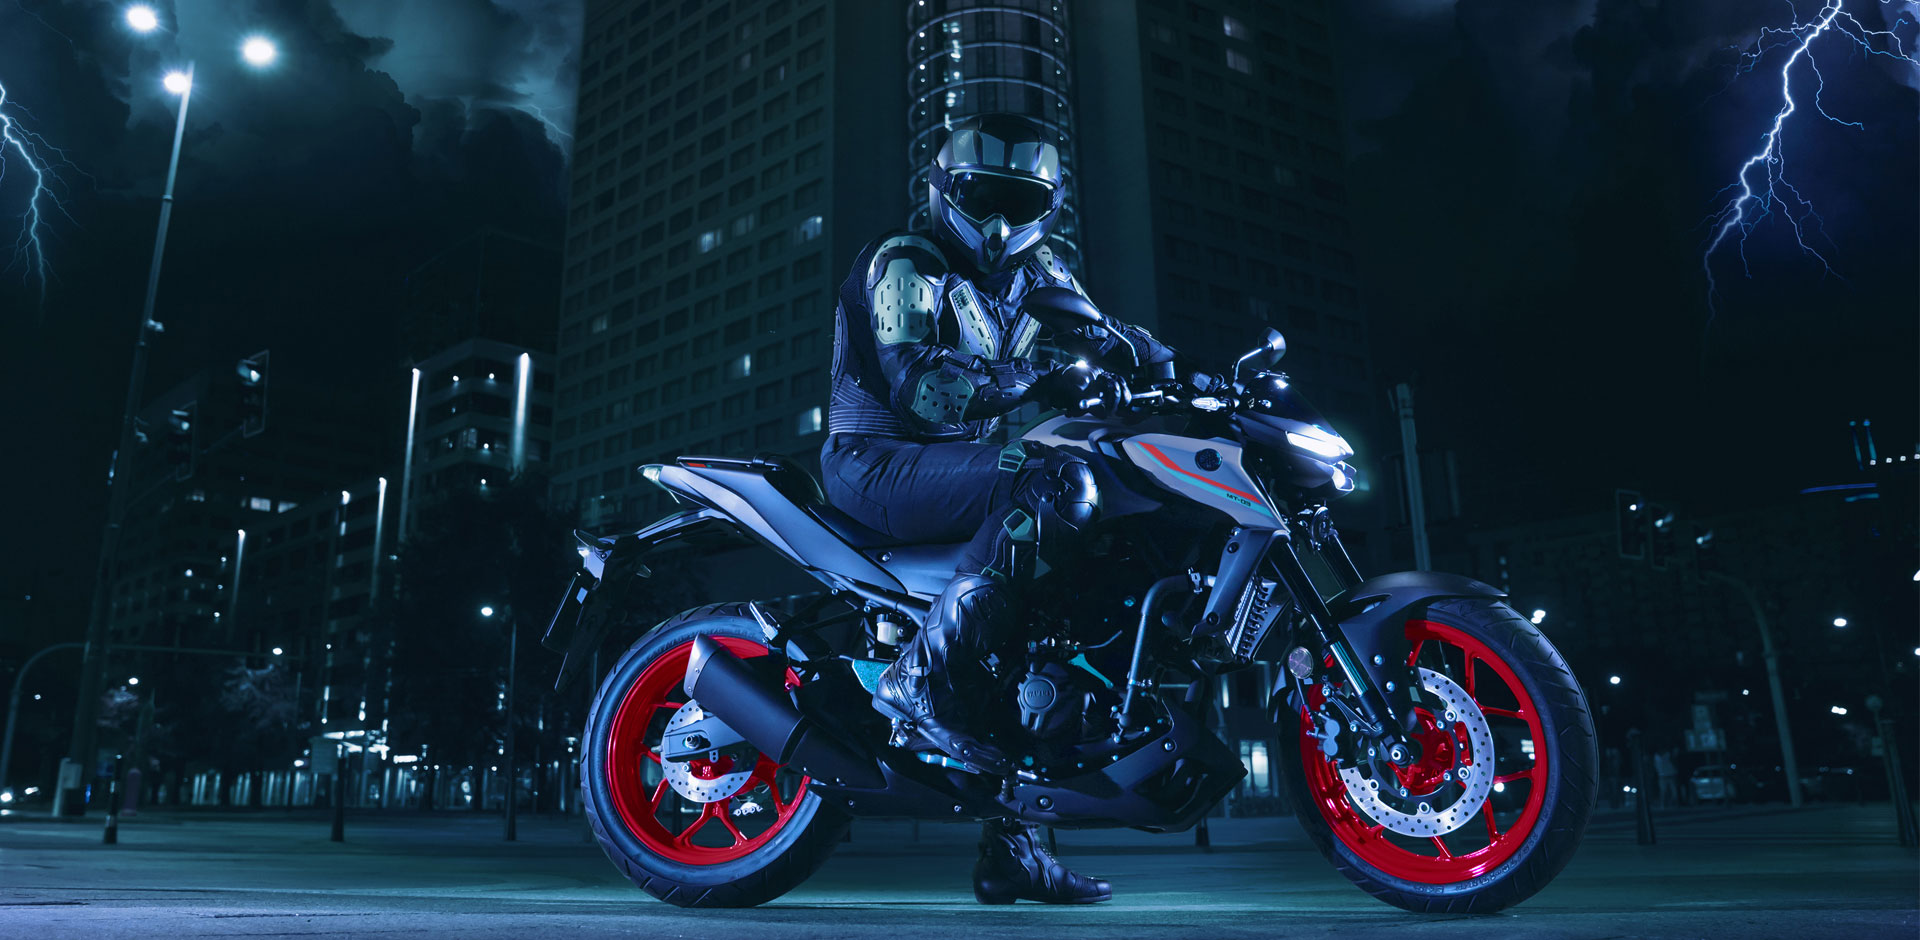 Five Reasons the Yamaha MT-03 is the Perfect Beginner Bike